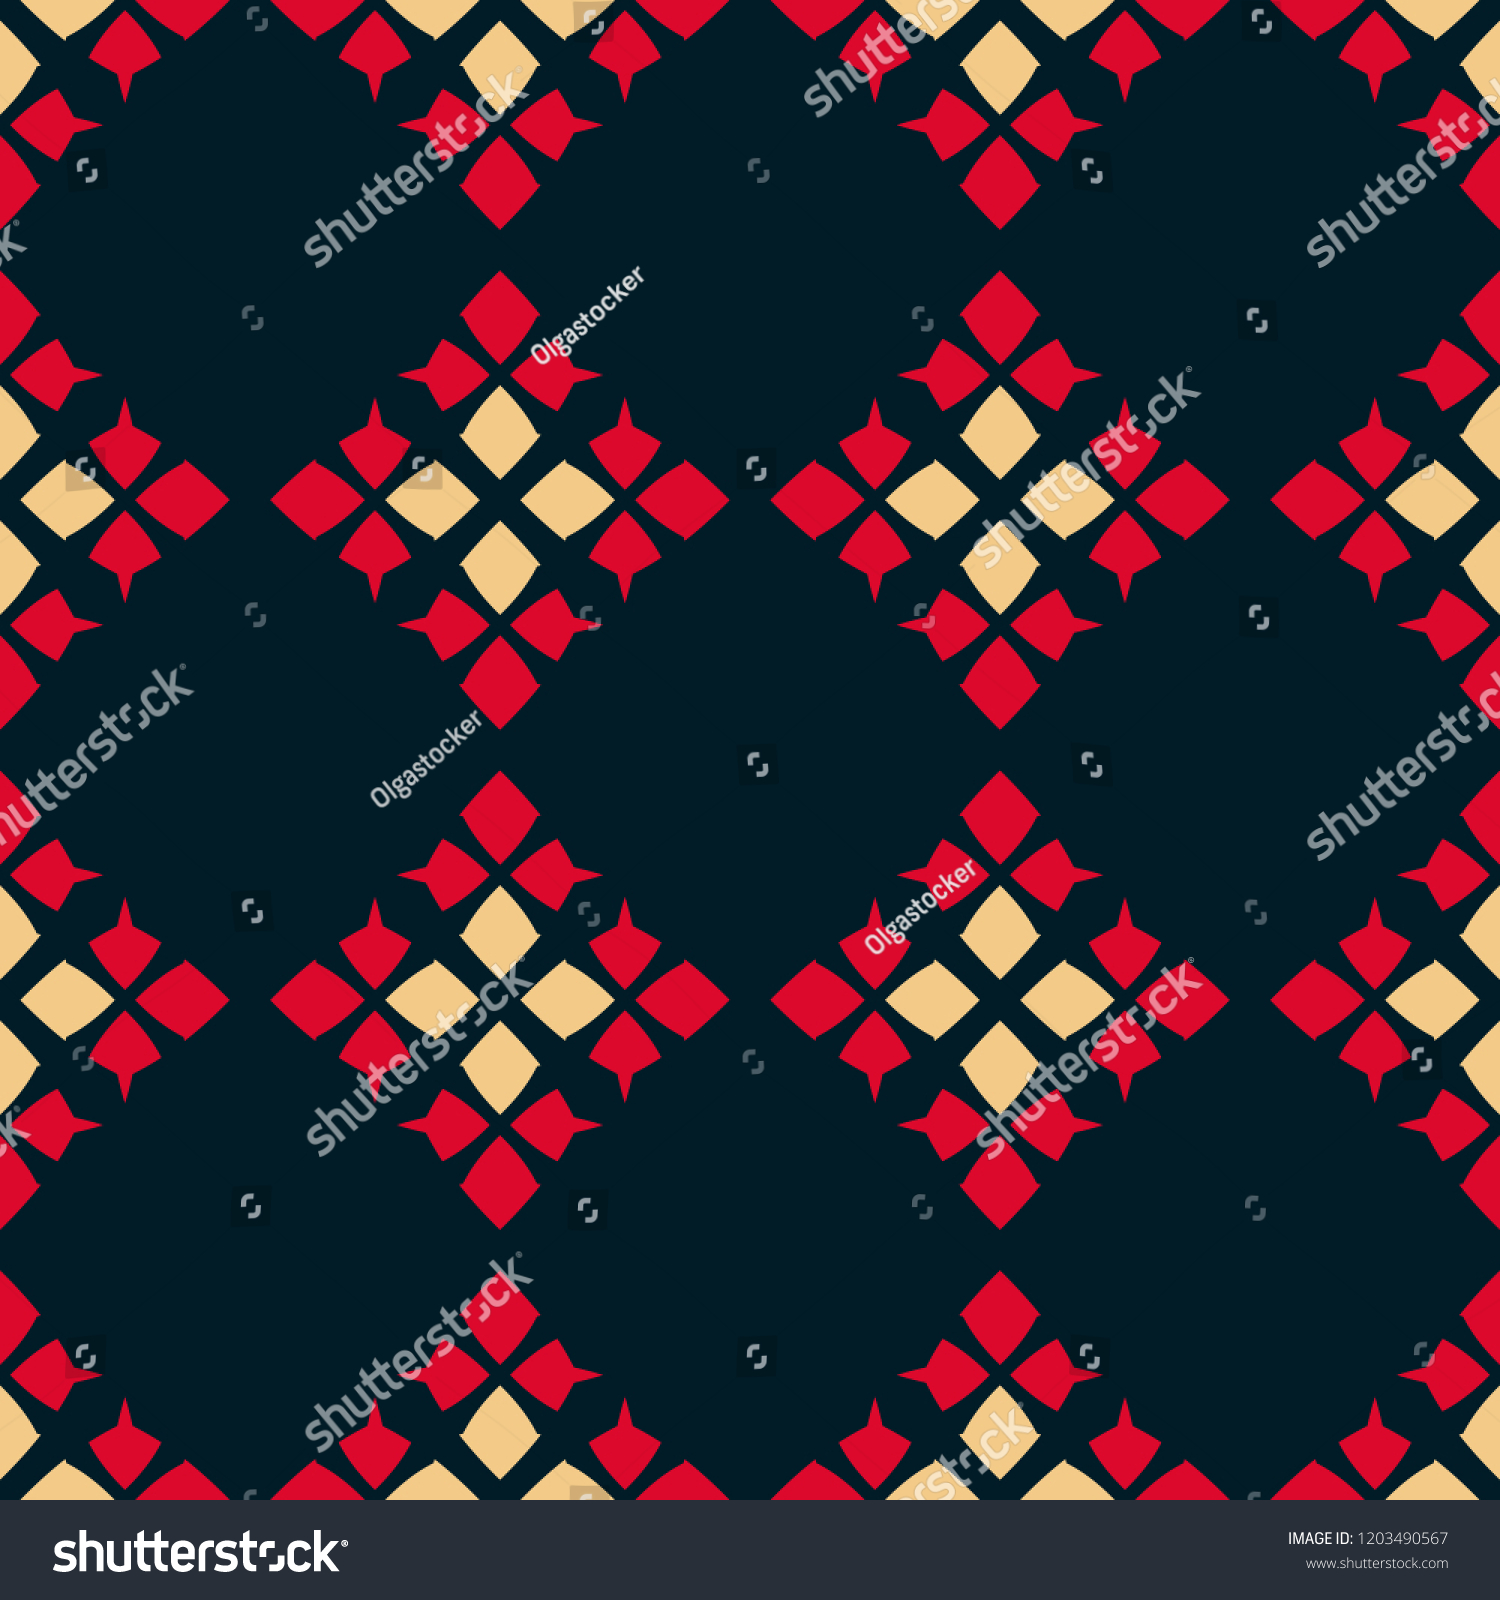 SVG of Traditional folk ornament. Vector geometric seamless pattern. Tribal ethnic motif. Ornamental texture with rhombuses, flower shapes, diamonds. Red, black and yellow colored background. Repeat design svg